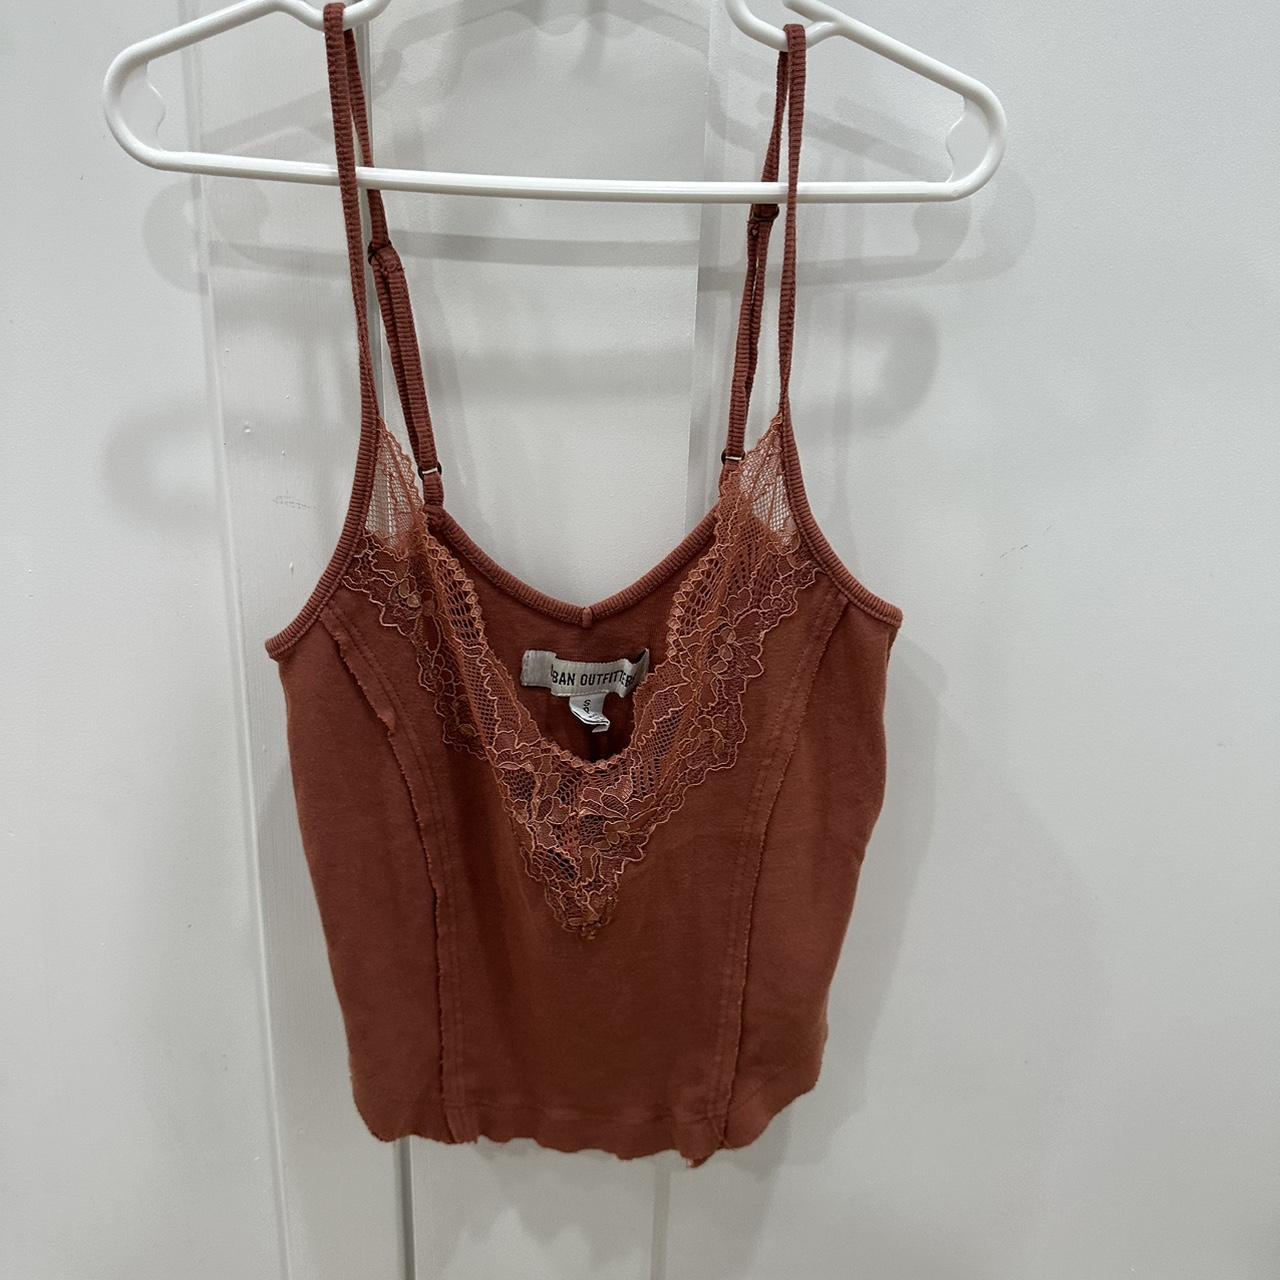 Urban Outfitters Women's Vest